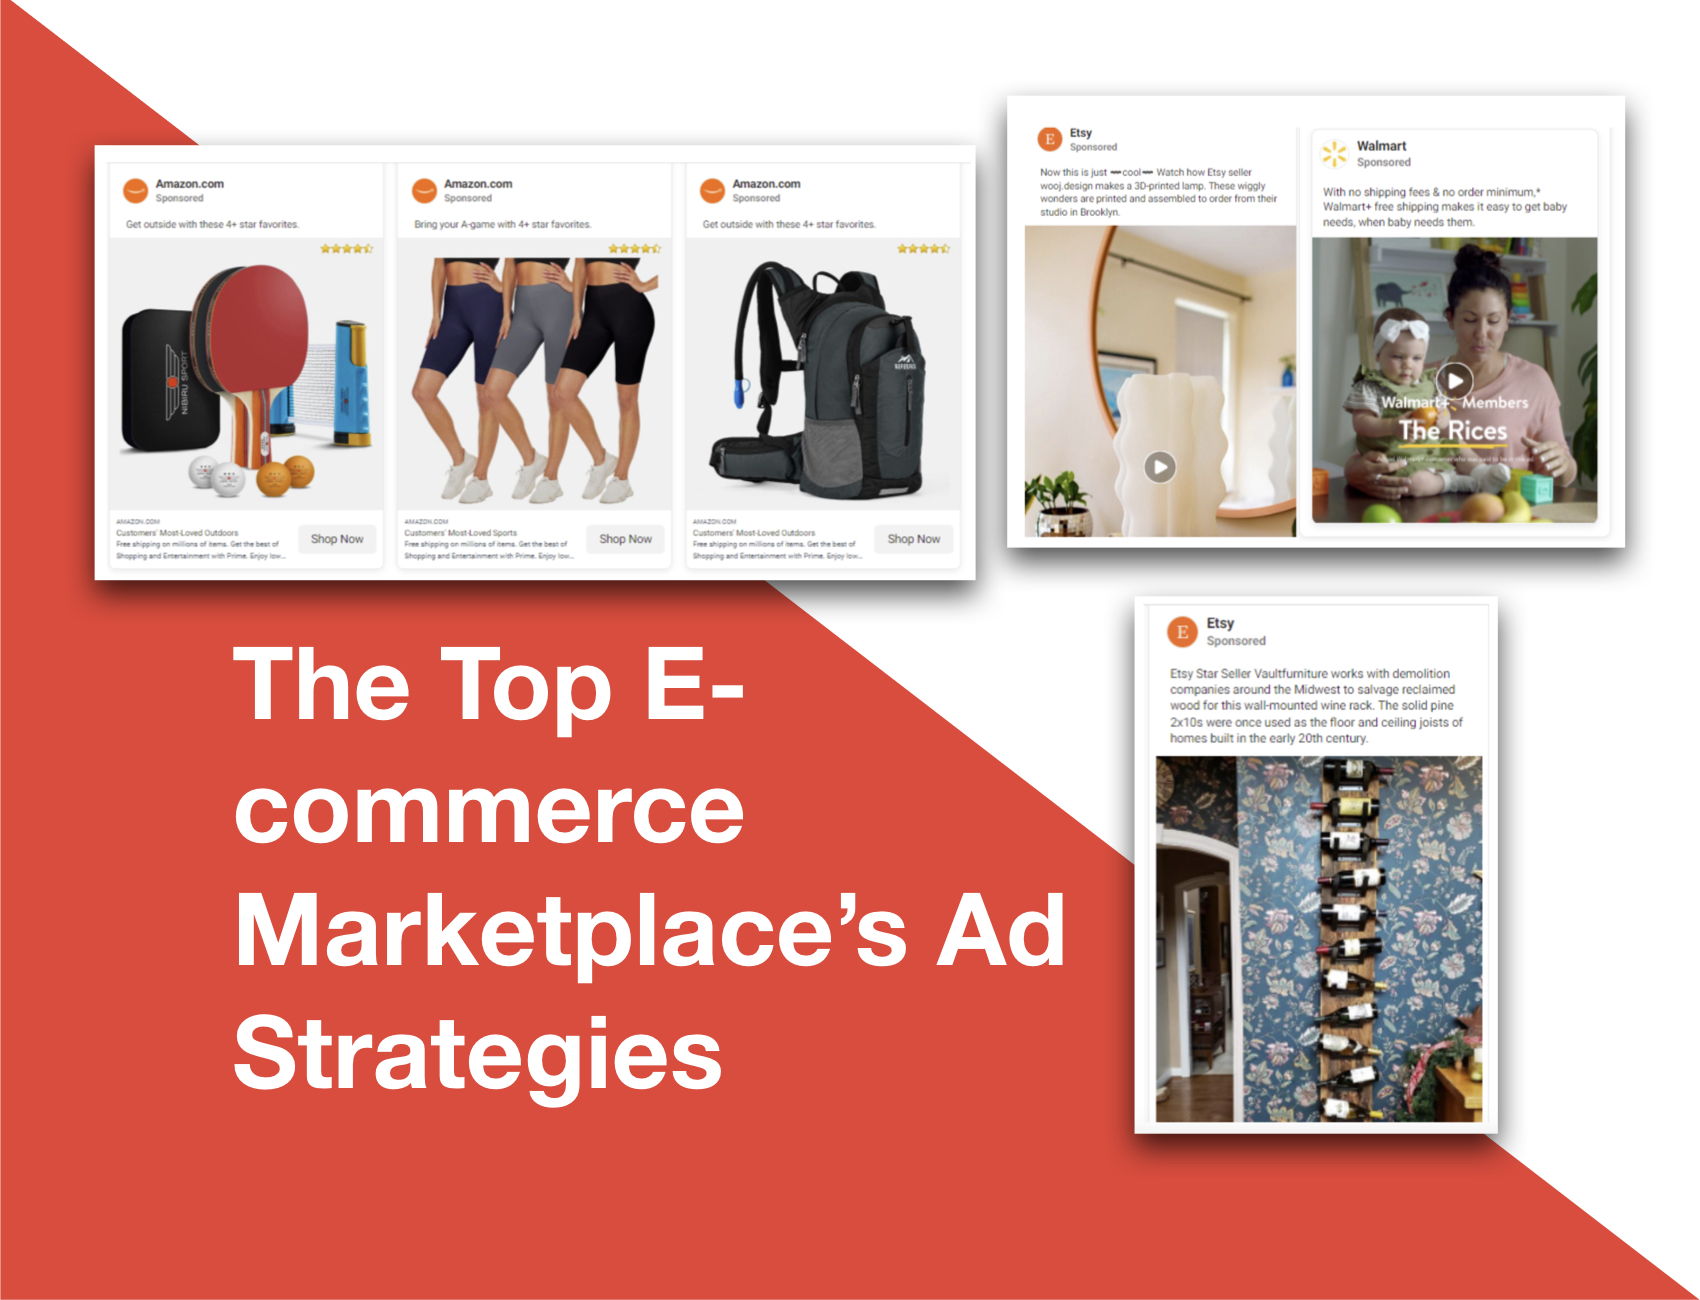 5 Key Takeaways from the Top Ecommerce Marketplaces’ Ad Strategies￼